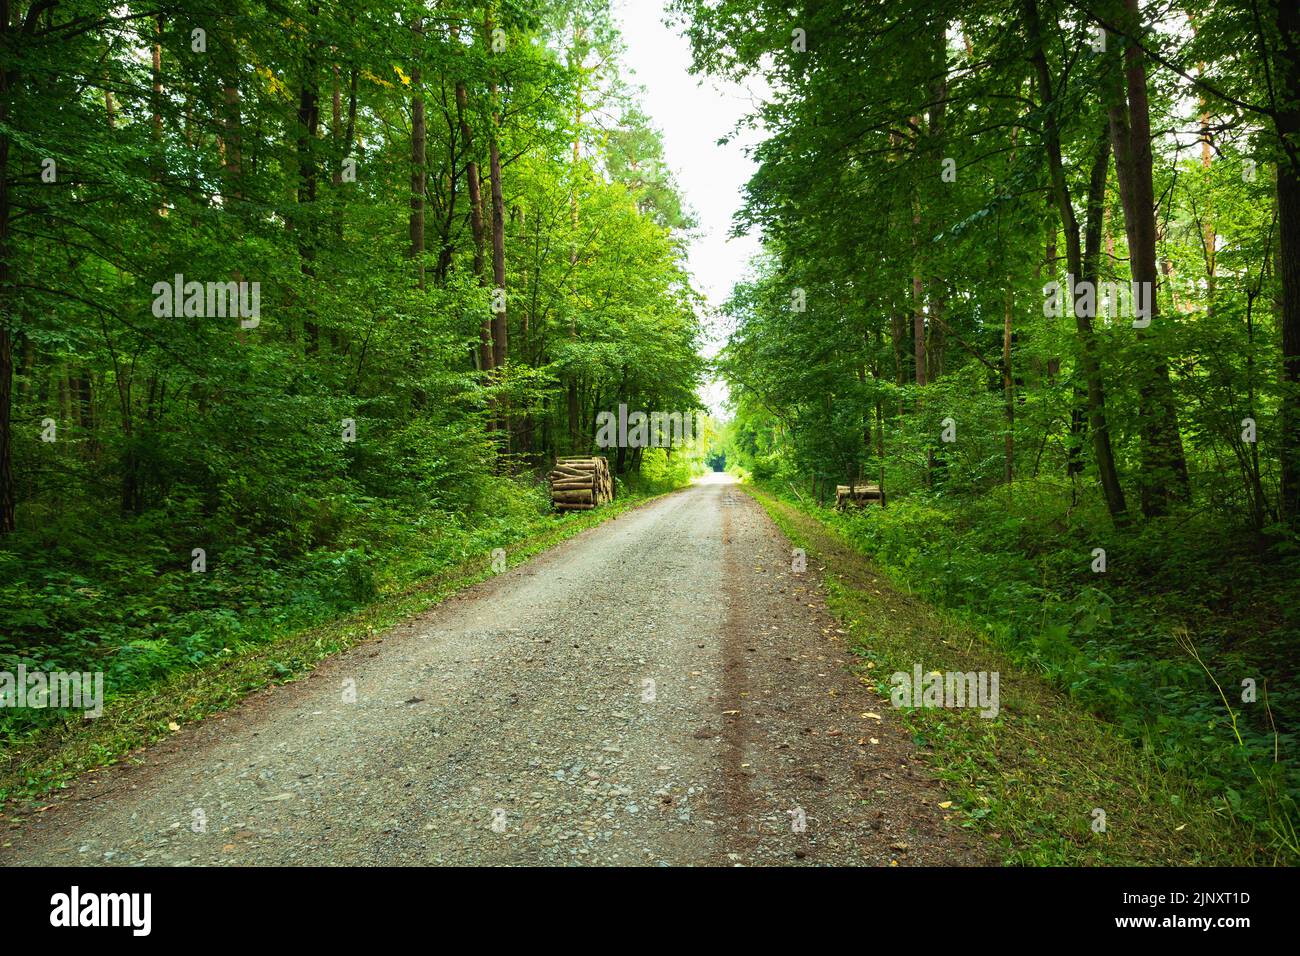 A straight dirt road through a green forest, summer day Stock Photo